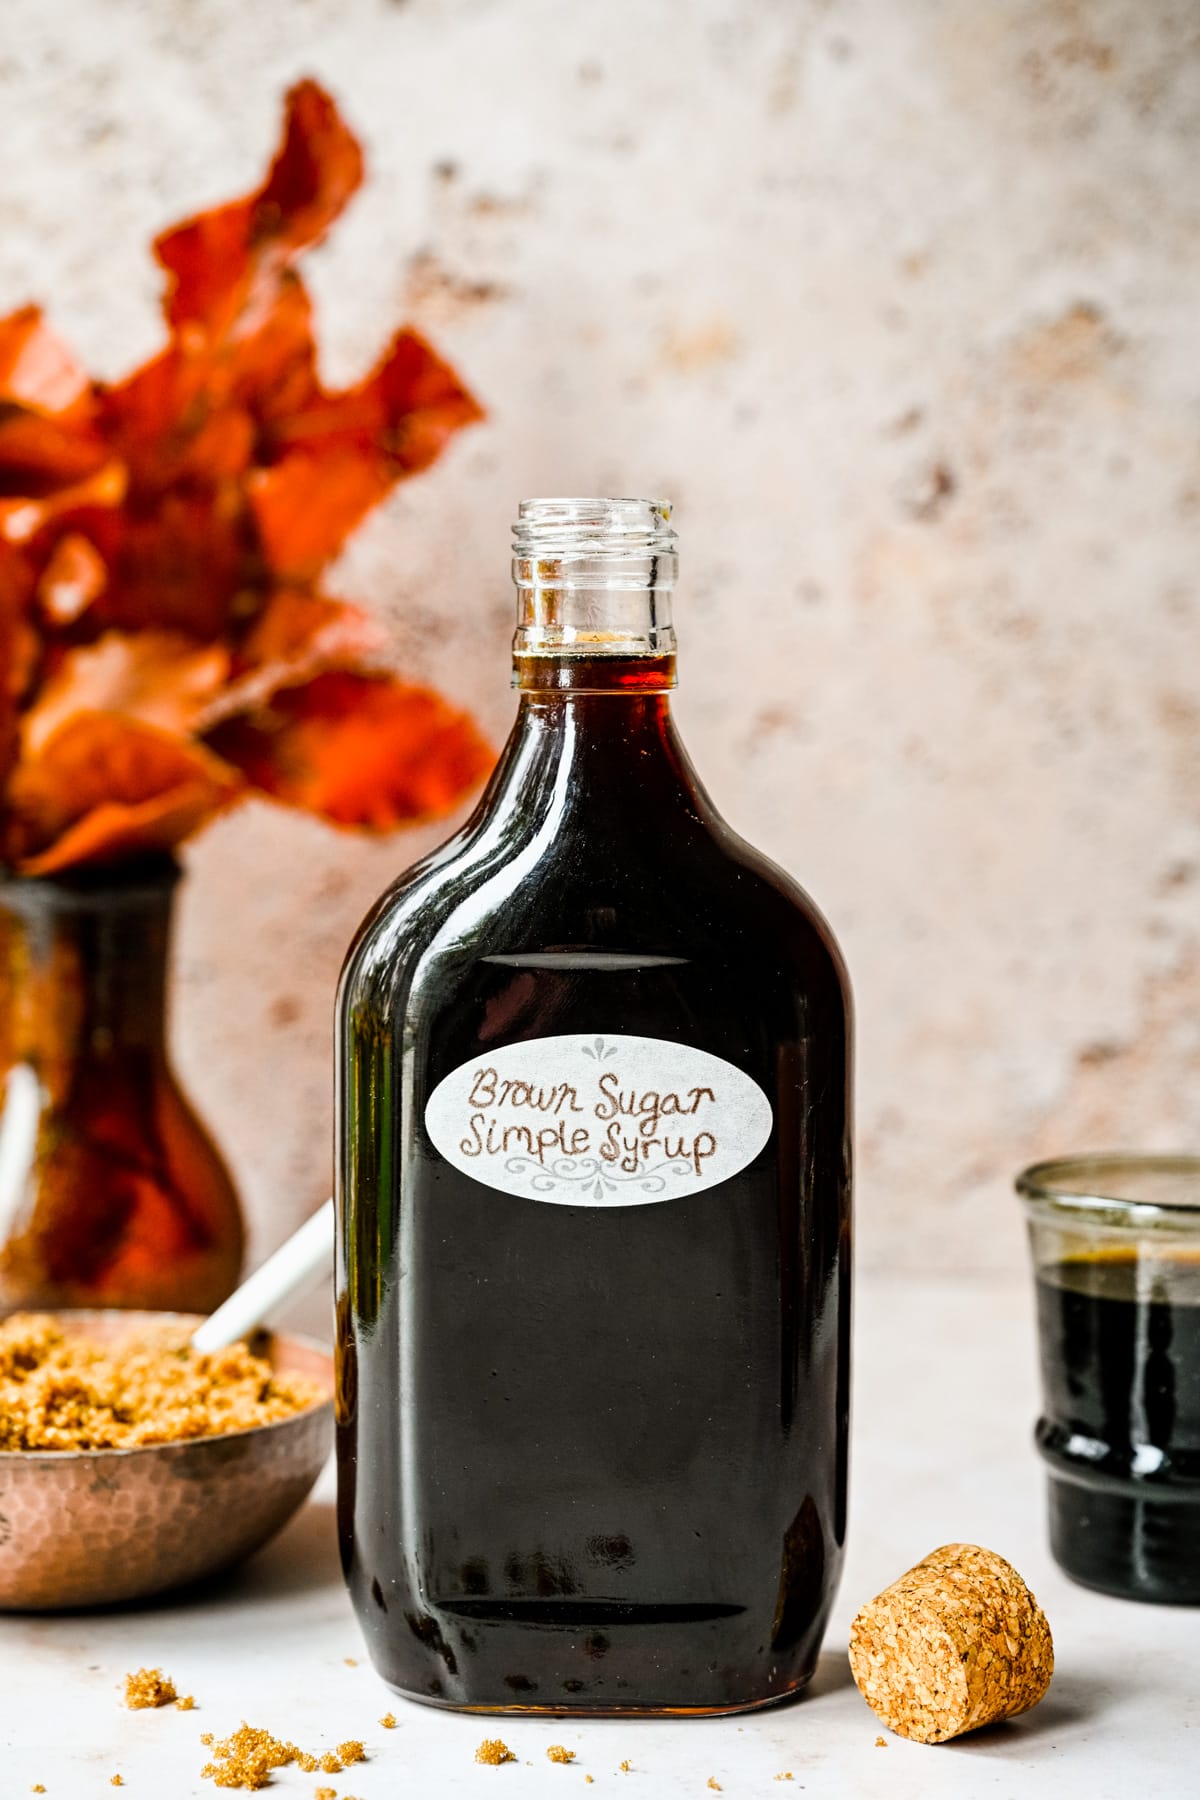 Brown sugar simple syrup in a glass bottle.